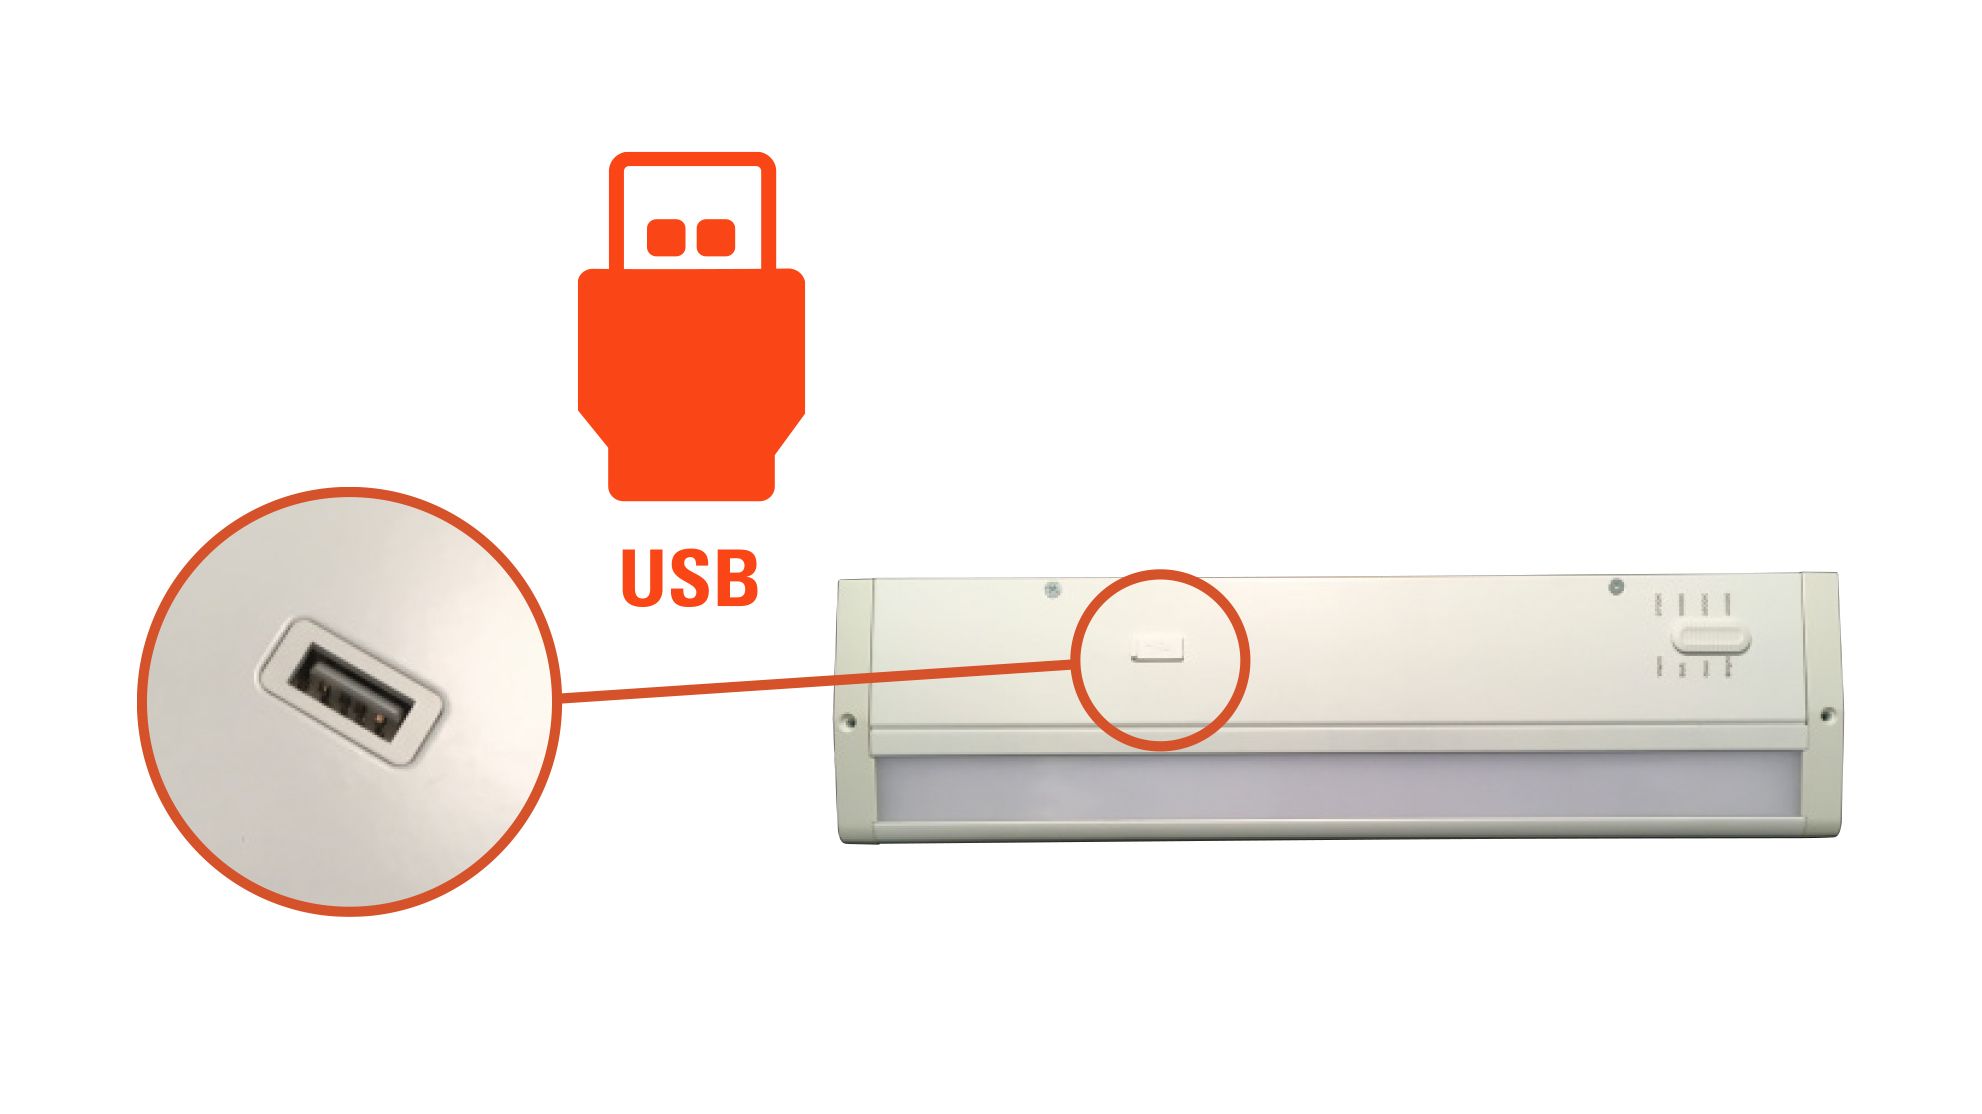 Add convenience with the USB charging